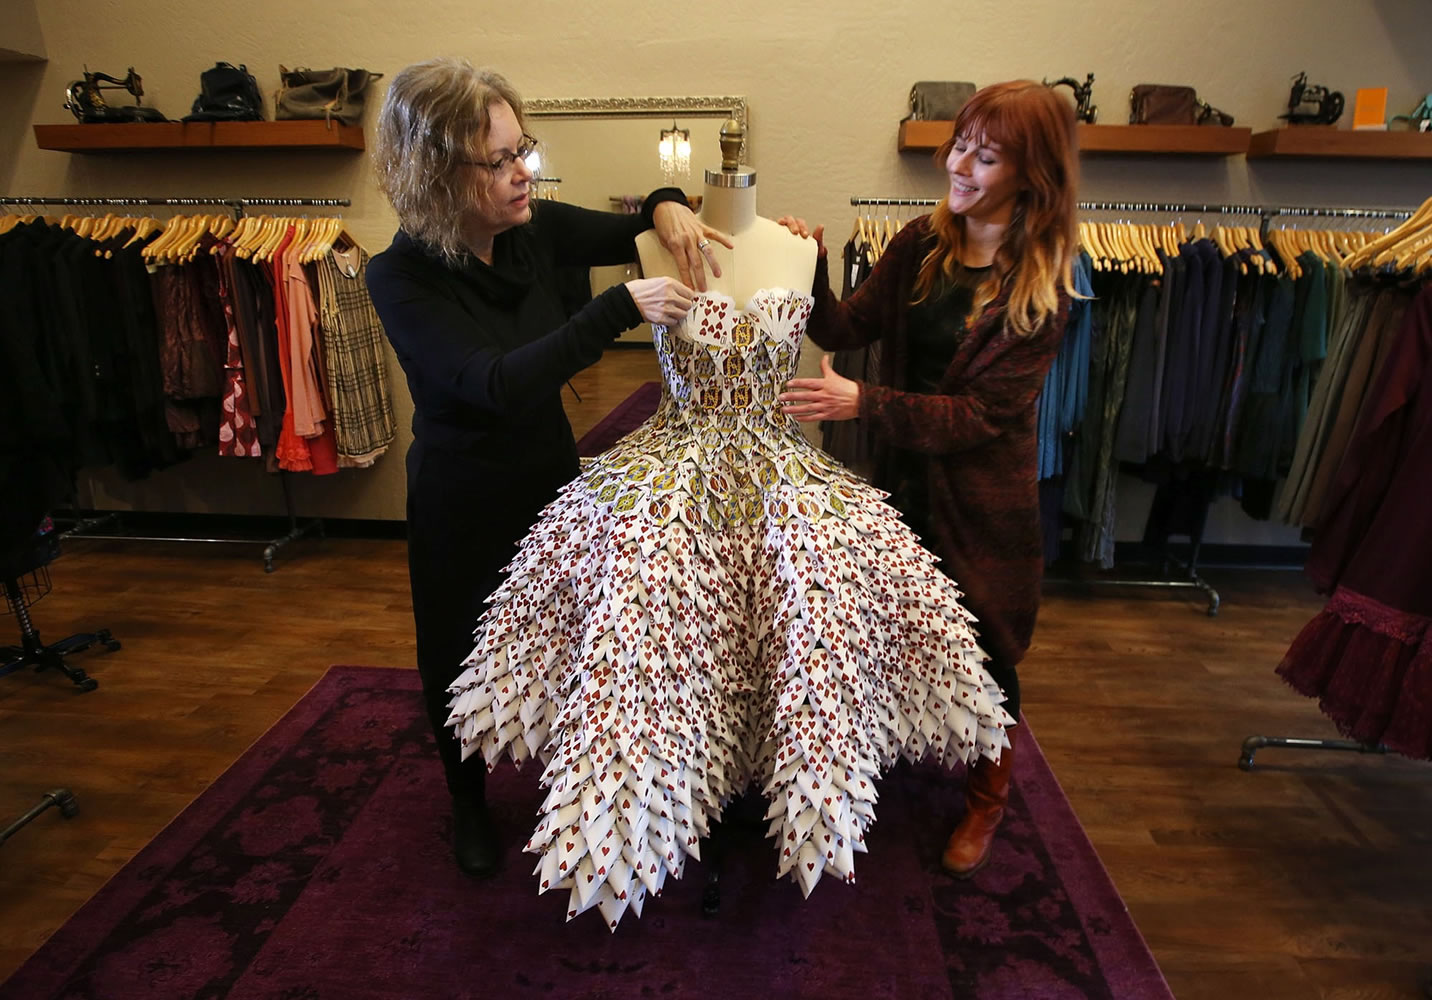 Marjorie Taylor, left, and her daughter, Amber, co-owners of Velvet Edge in Eugene, Ore., prepare a dress made from recycled casino cards for display at their boutique to celebrate Valentine's Day.